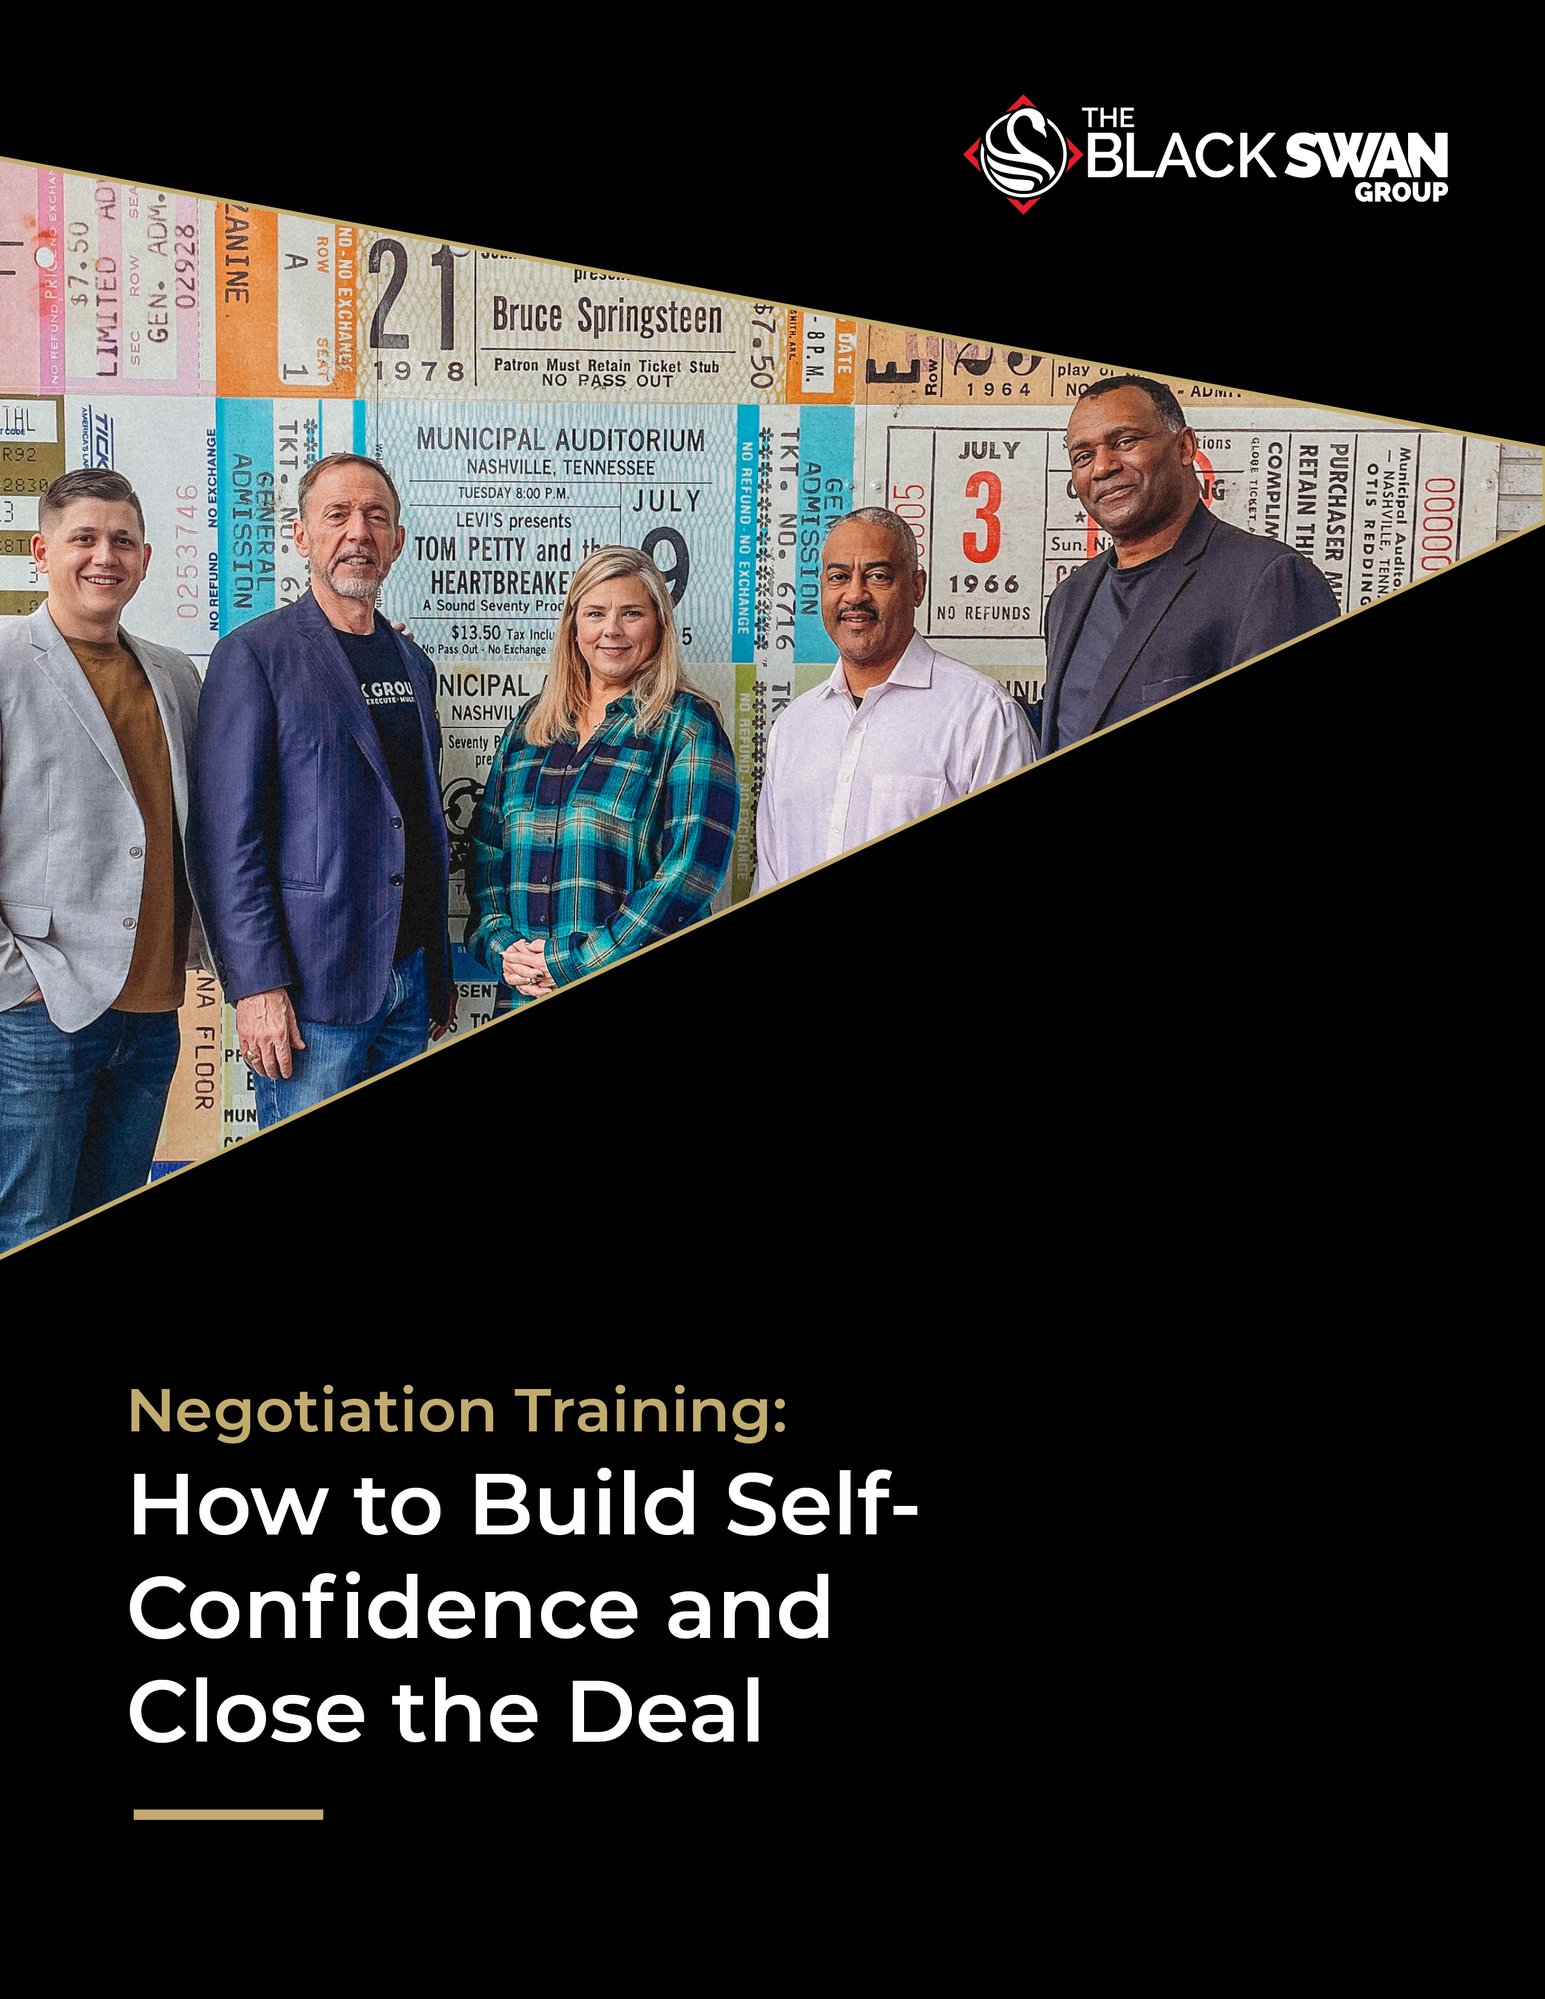 Negotiation Training How to Build Self-Confidence and Close the Deal Guide Cover Image